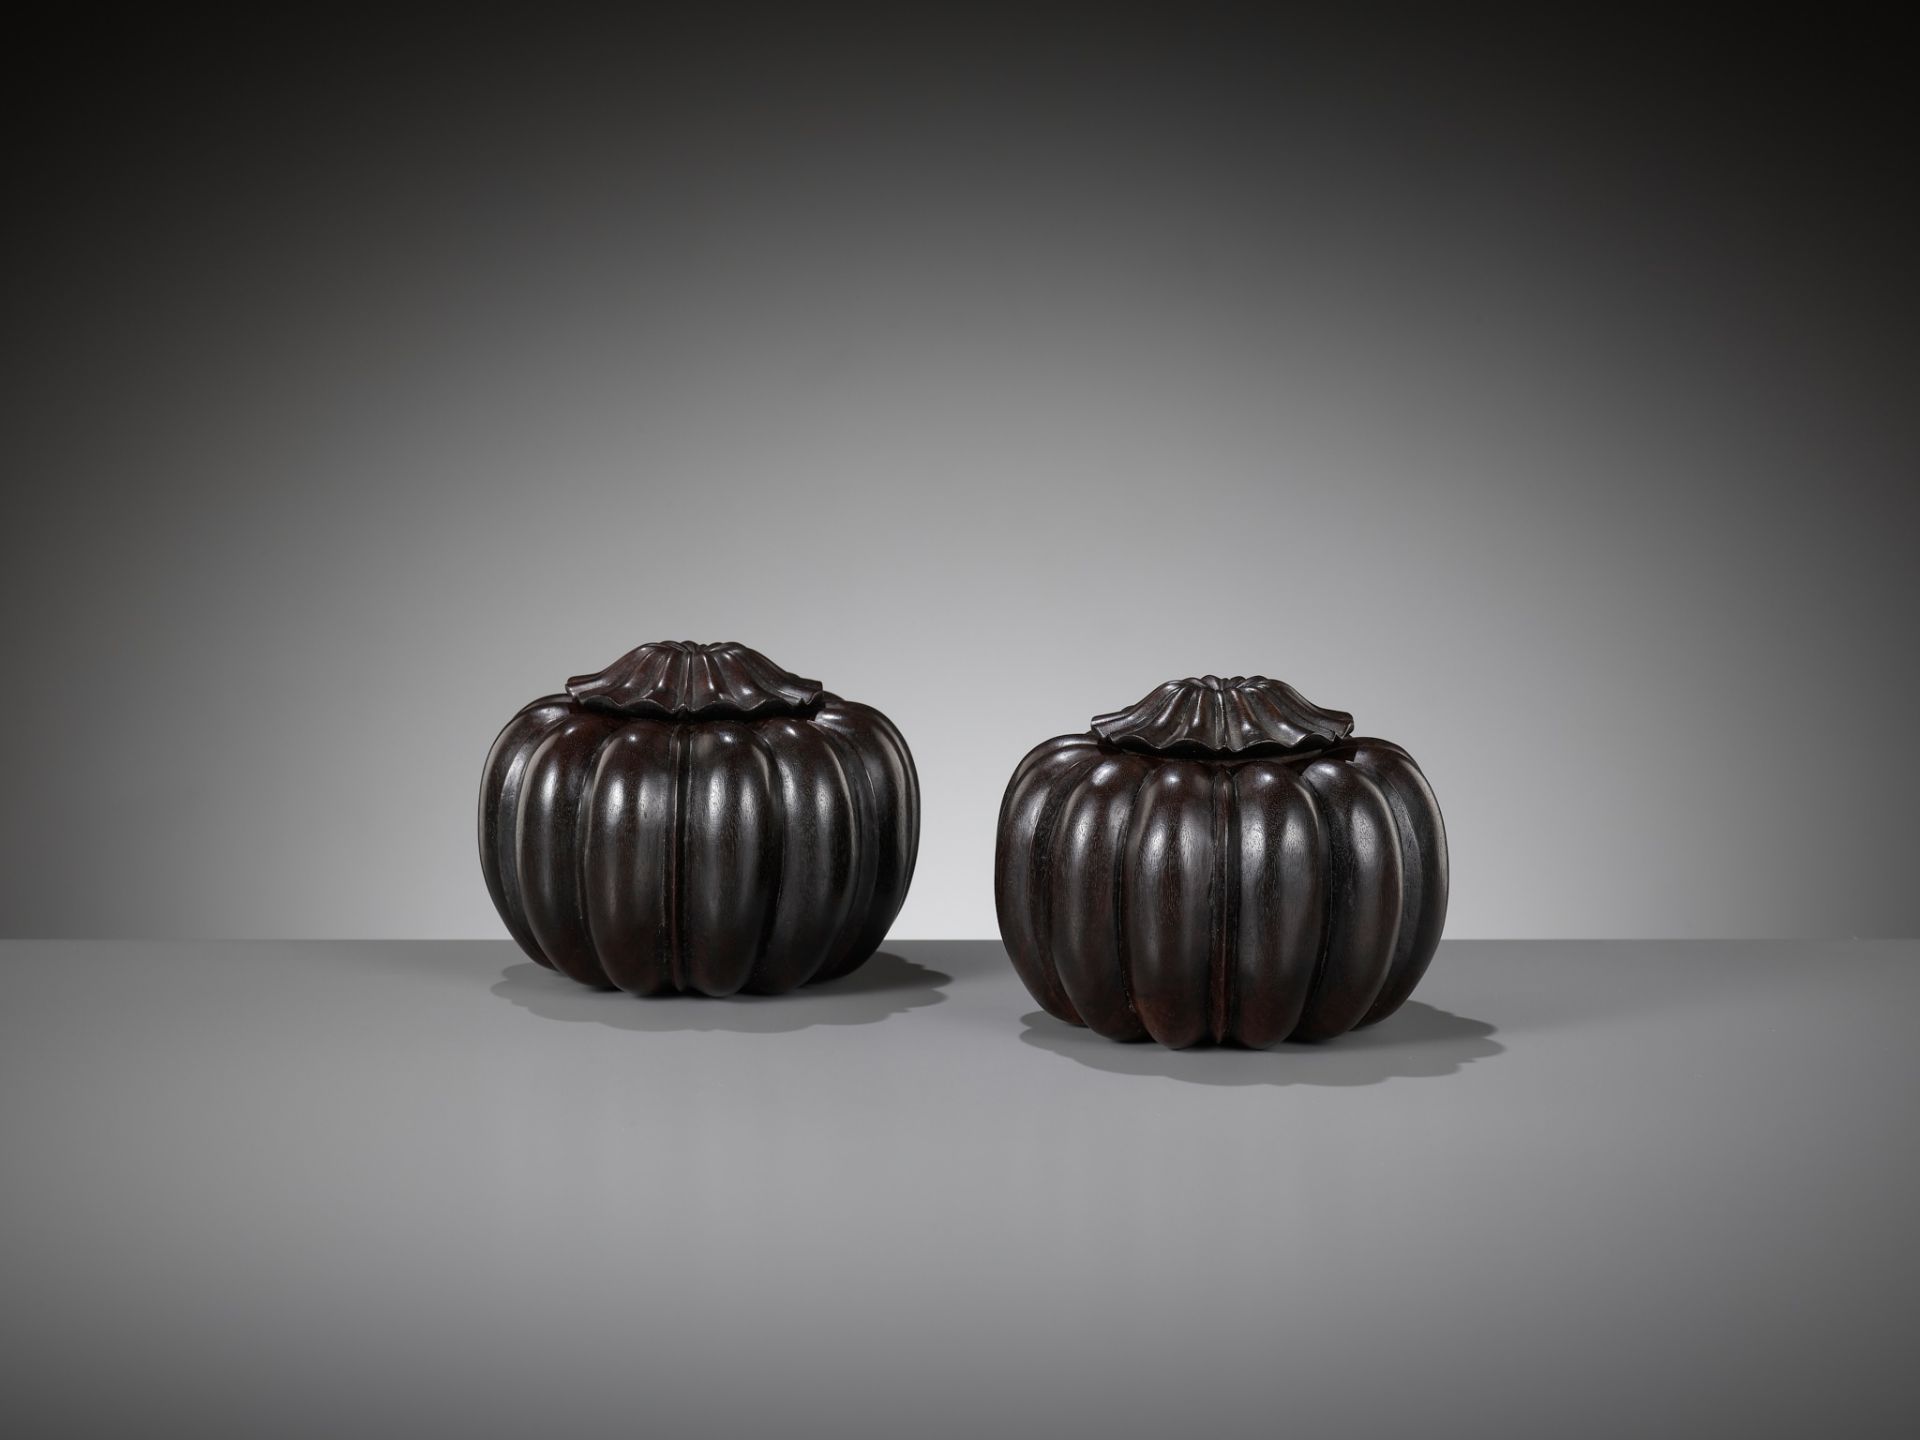 A PAIR OF ZITAN WEIQI COUNTER CONTAINERS, WEIQIZIHE, 17TH-18TH CENTURY - Image 3 of 10